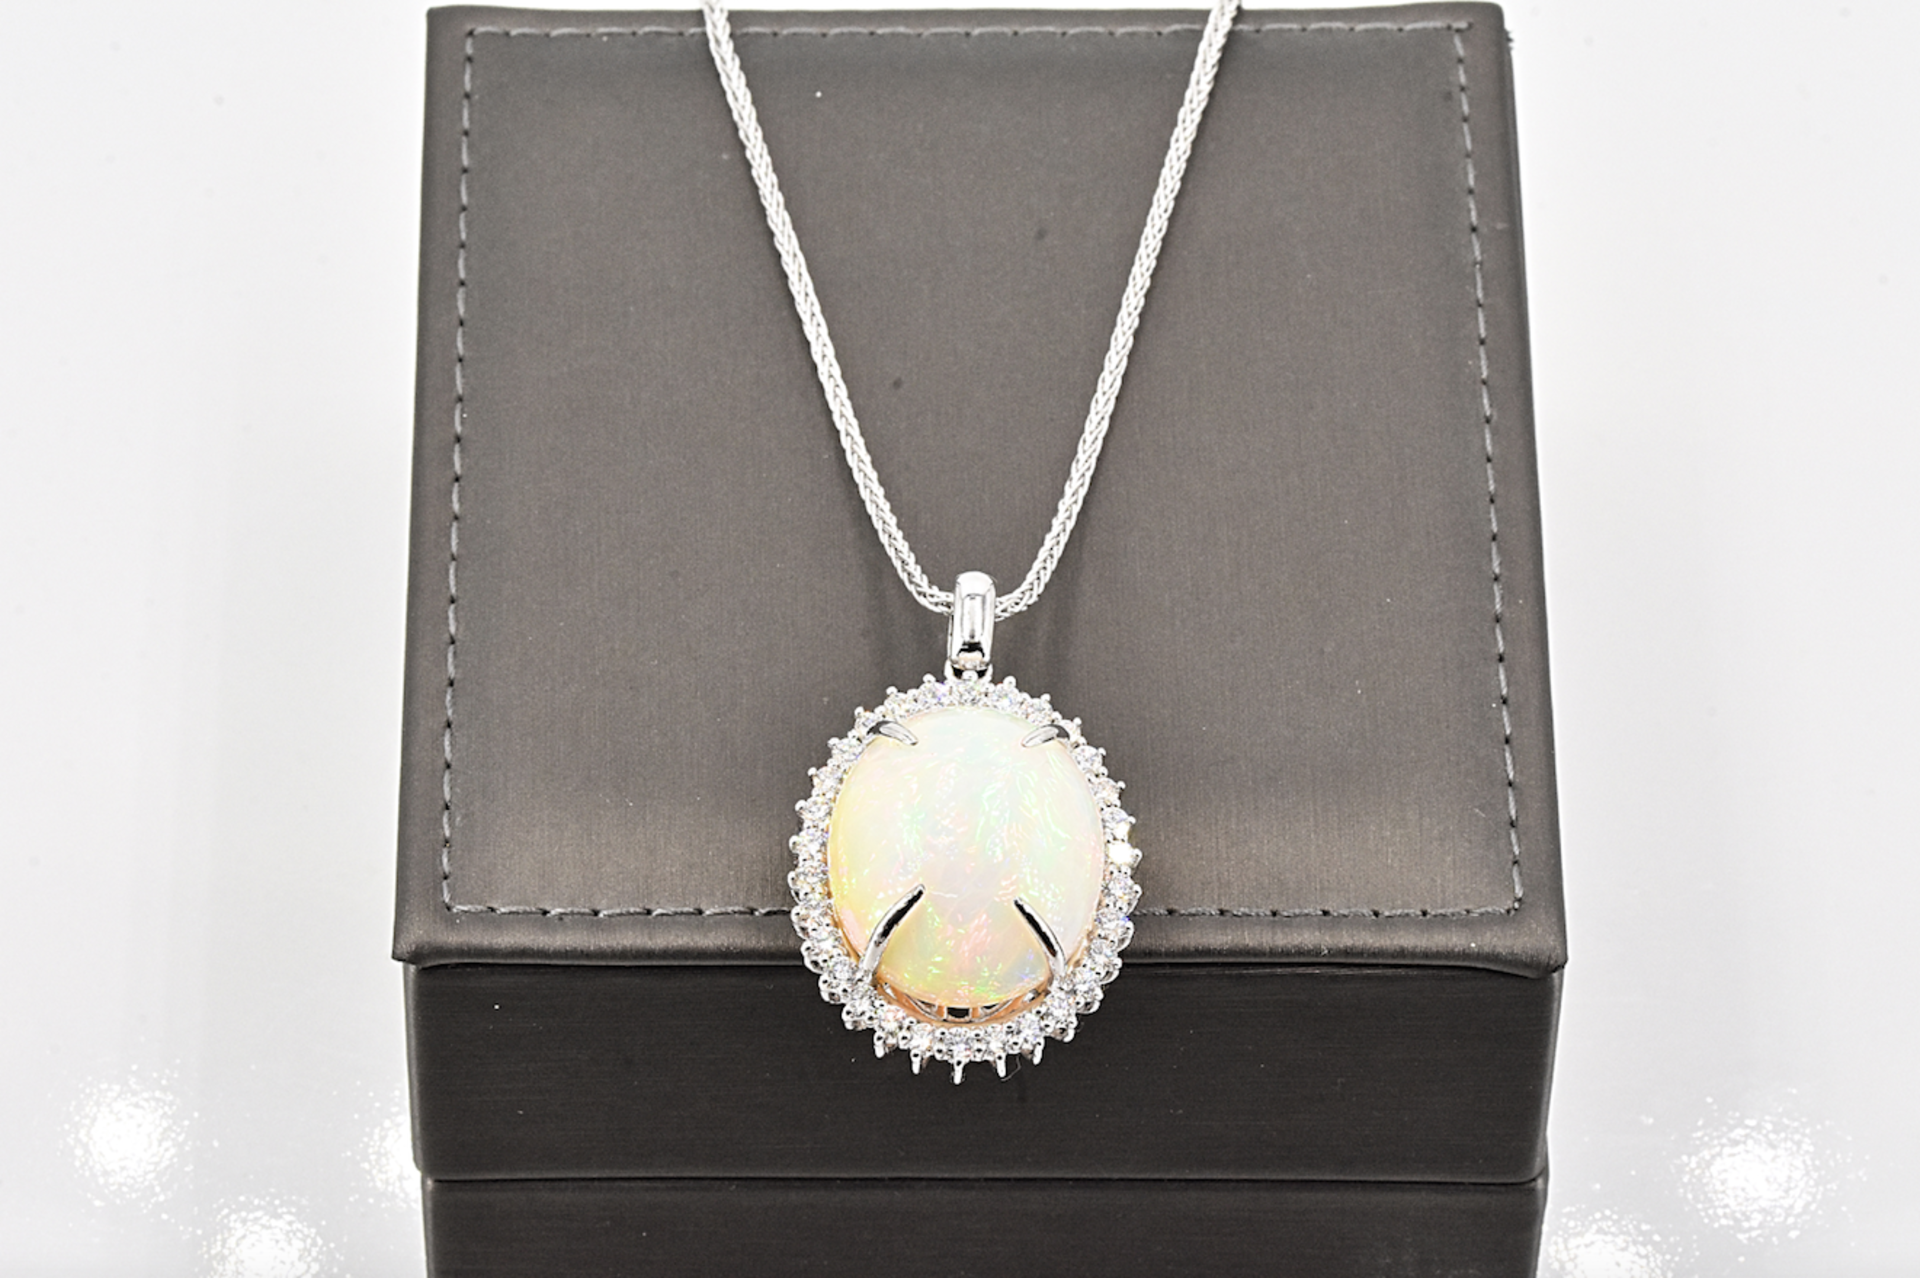 Necklace - 31.10 Ct. Opal - 1.88 Ct Diamonds - Image 7 of 7